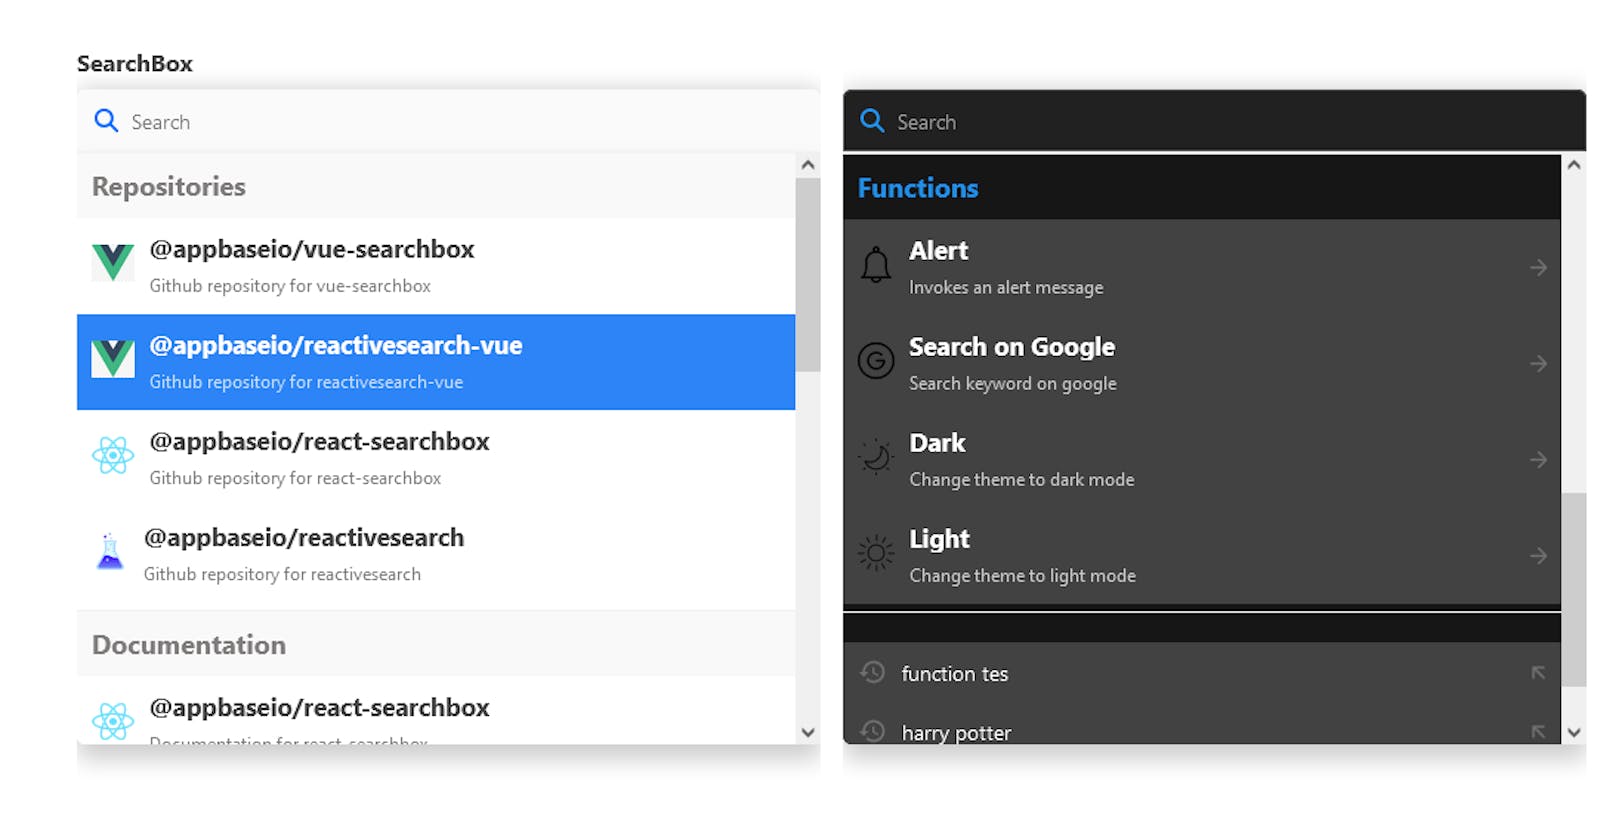 Tutorial: How To Build A Spotlight Like Search And Navigation Experience